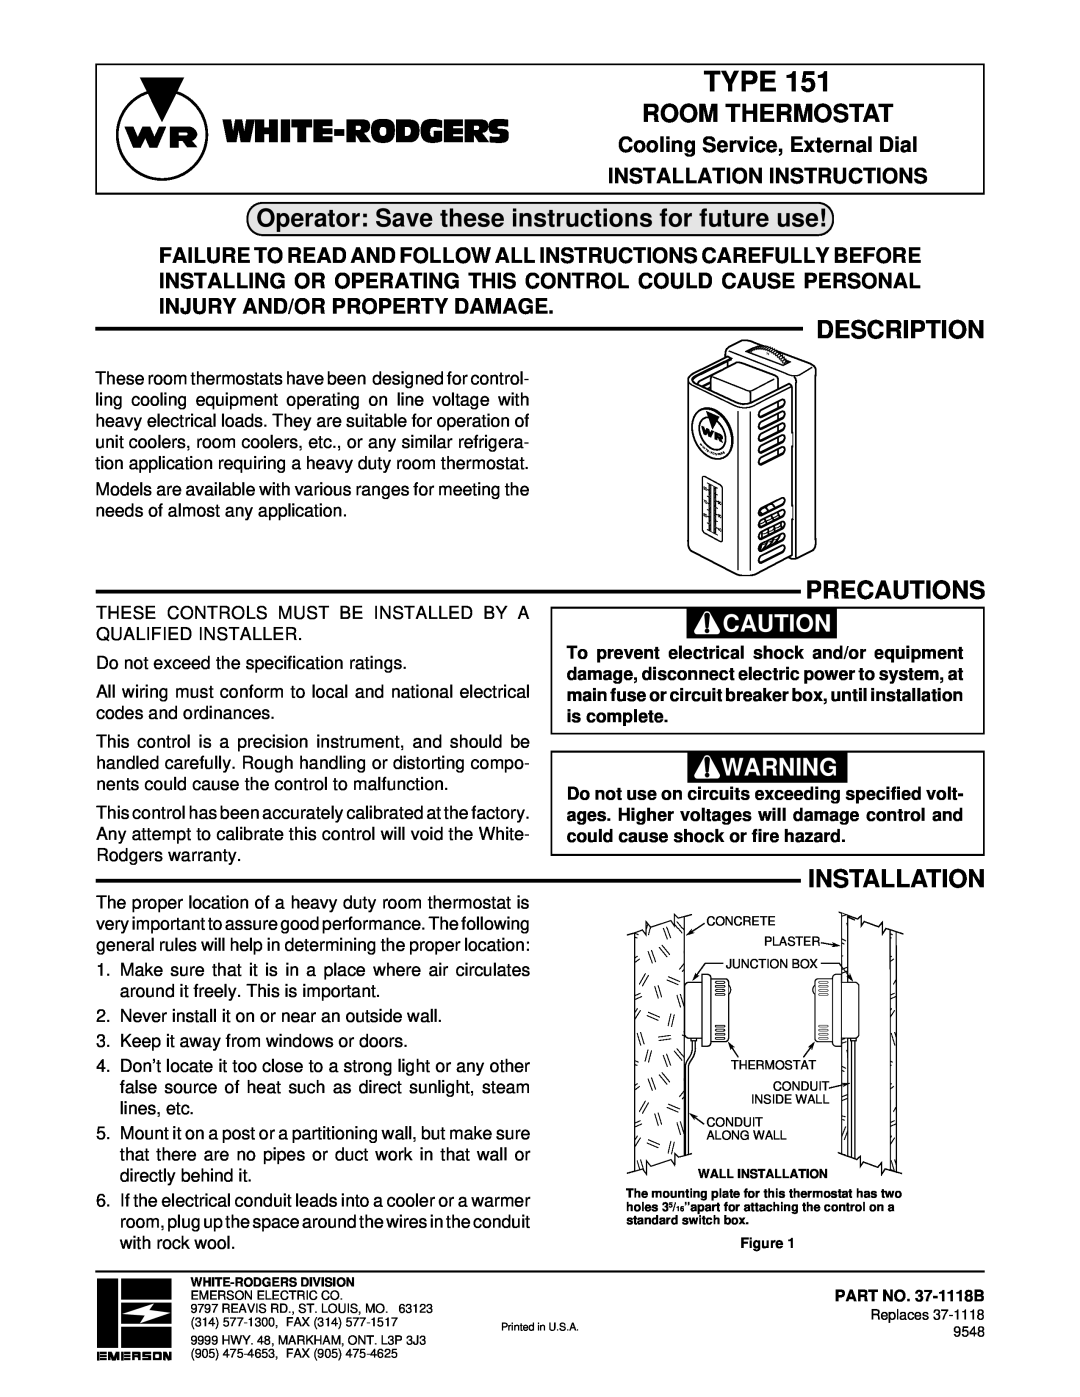 White Rodgers 151 installation instructions White-Rodgers, Type, Room Thermostat, Description, Precautions, Installation 